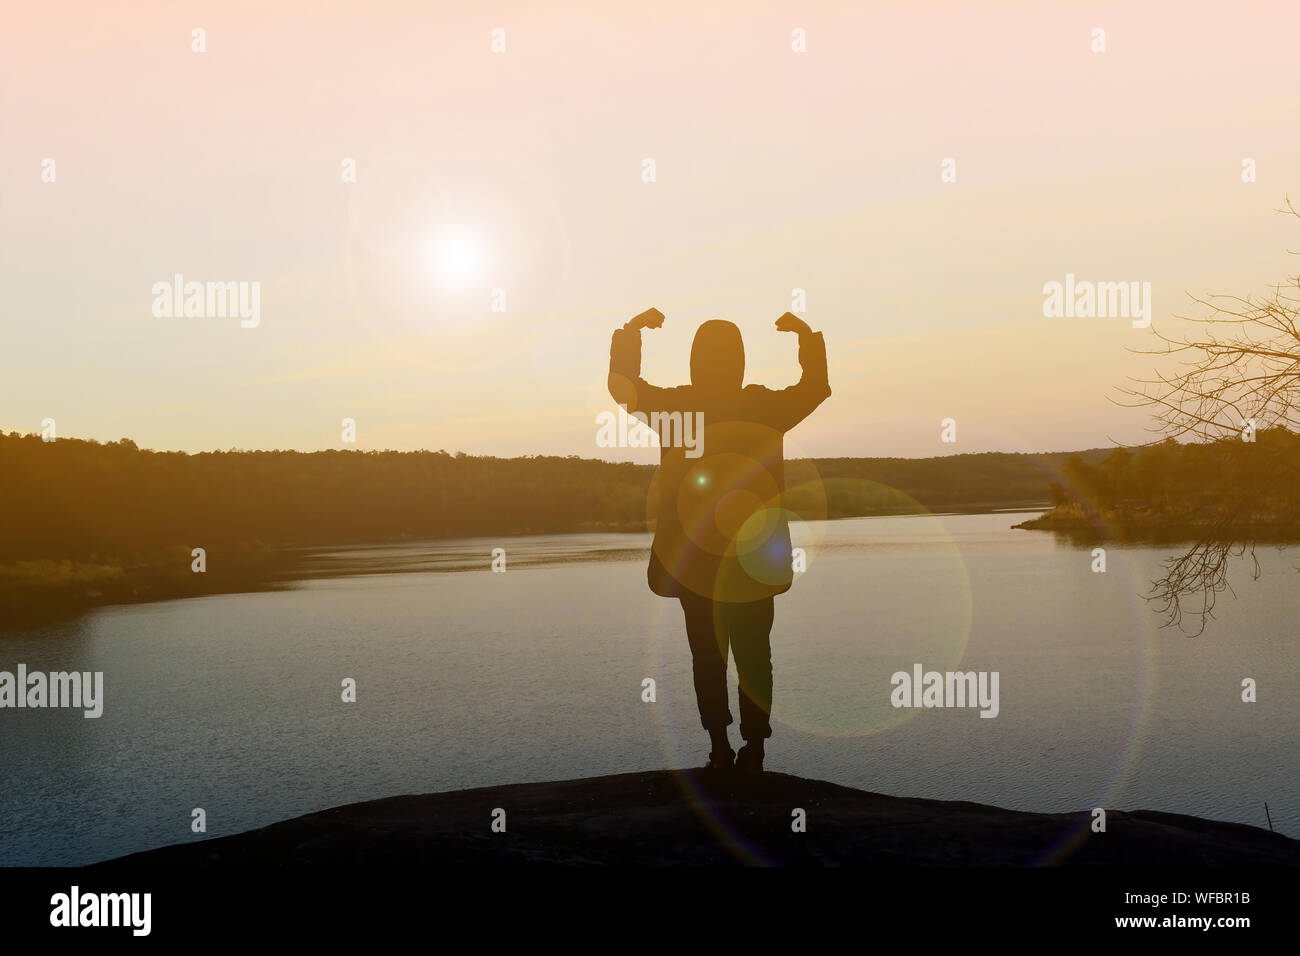 Silhouette Man Flexing Muscles On Rock Against Lake During Sunset Stock Photo